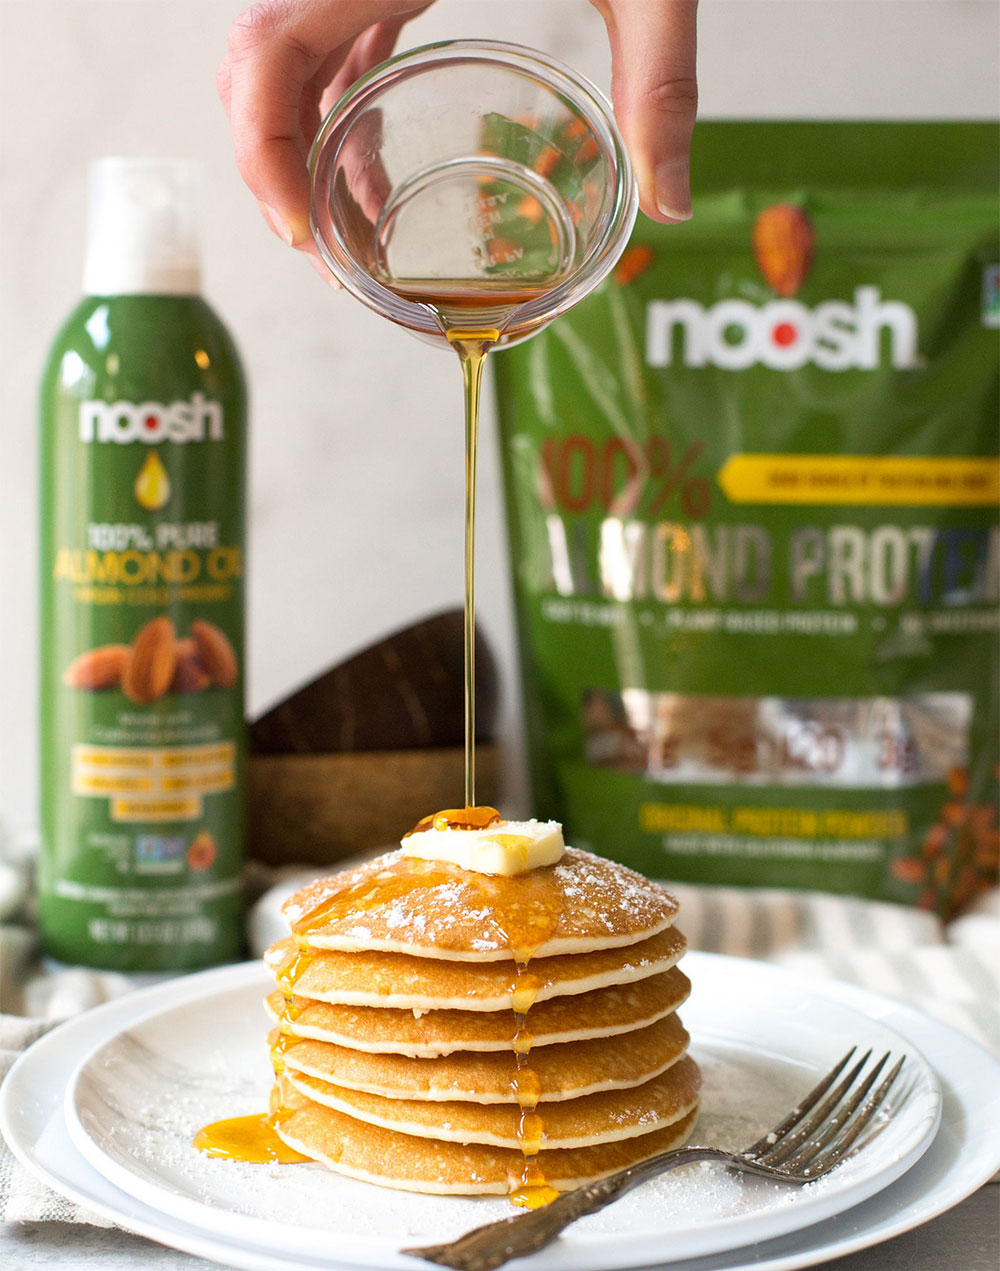 Minneapolis Packaging Design - Noosh Almond Oil and Almond Protein